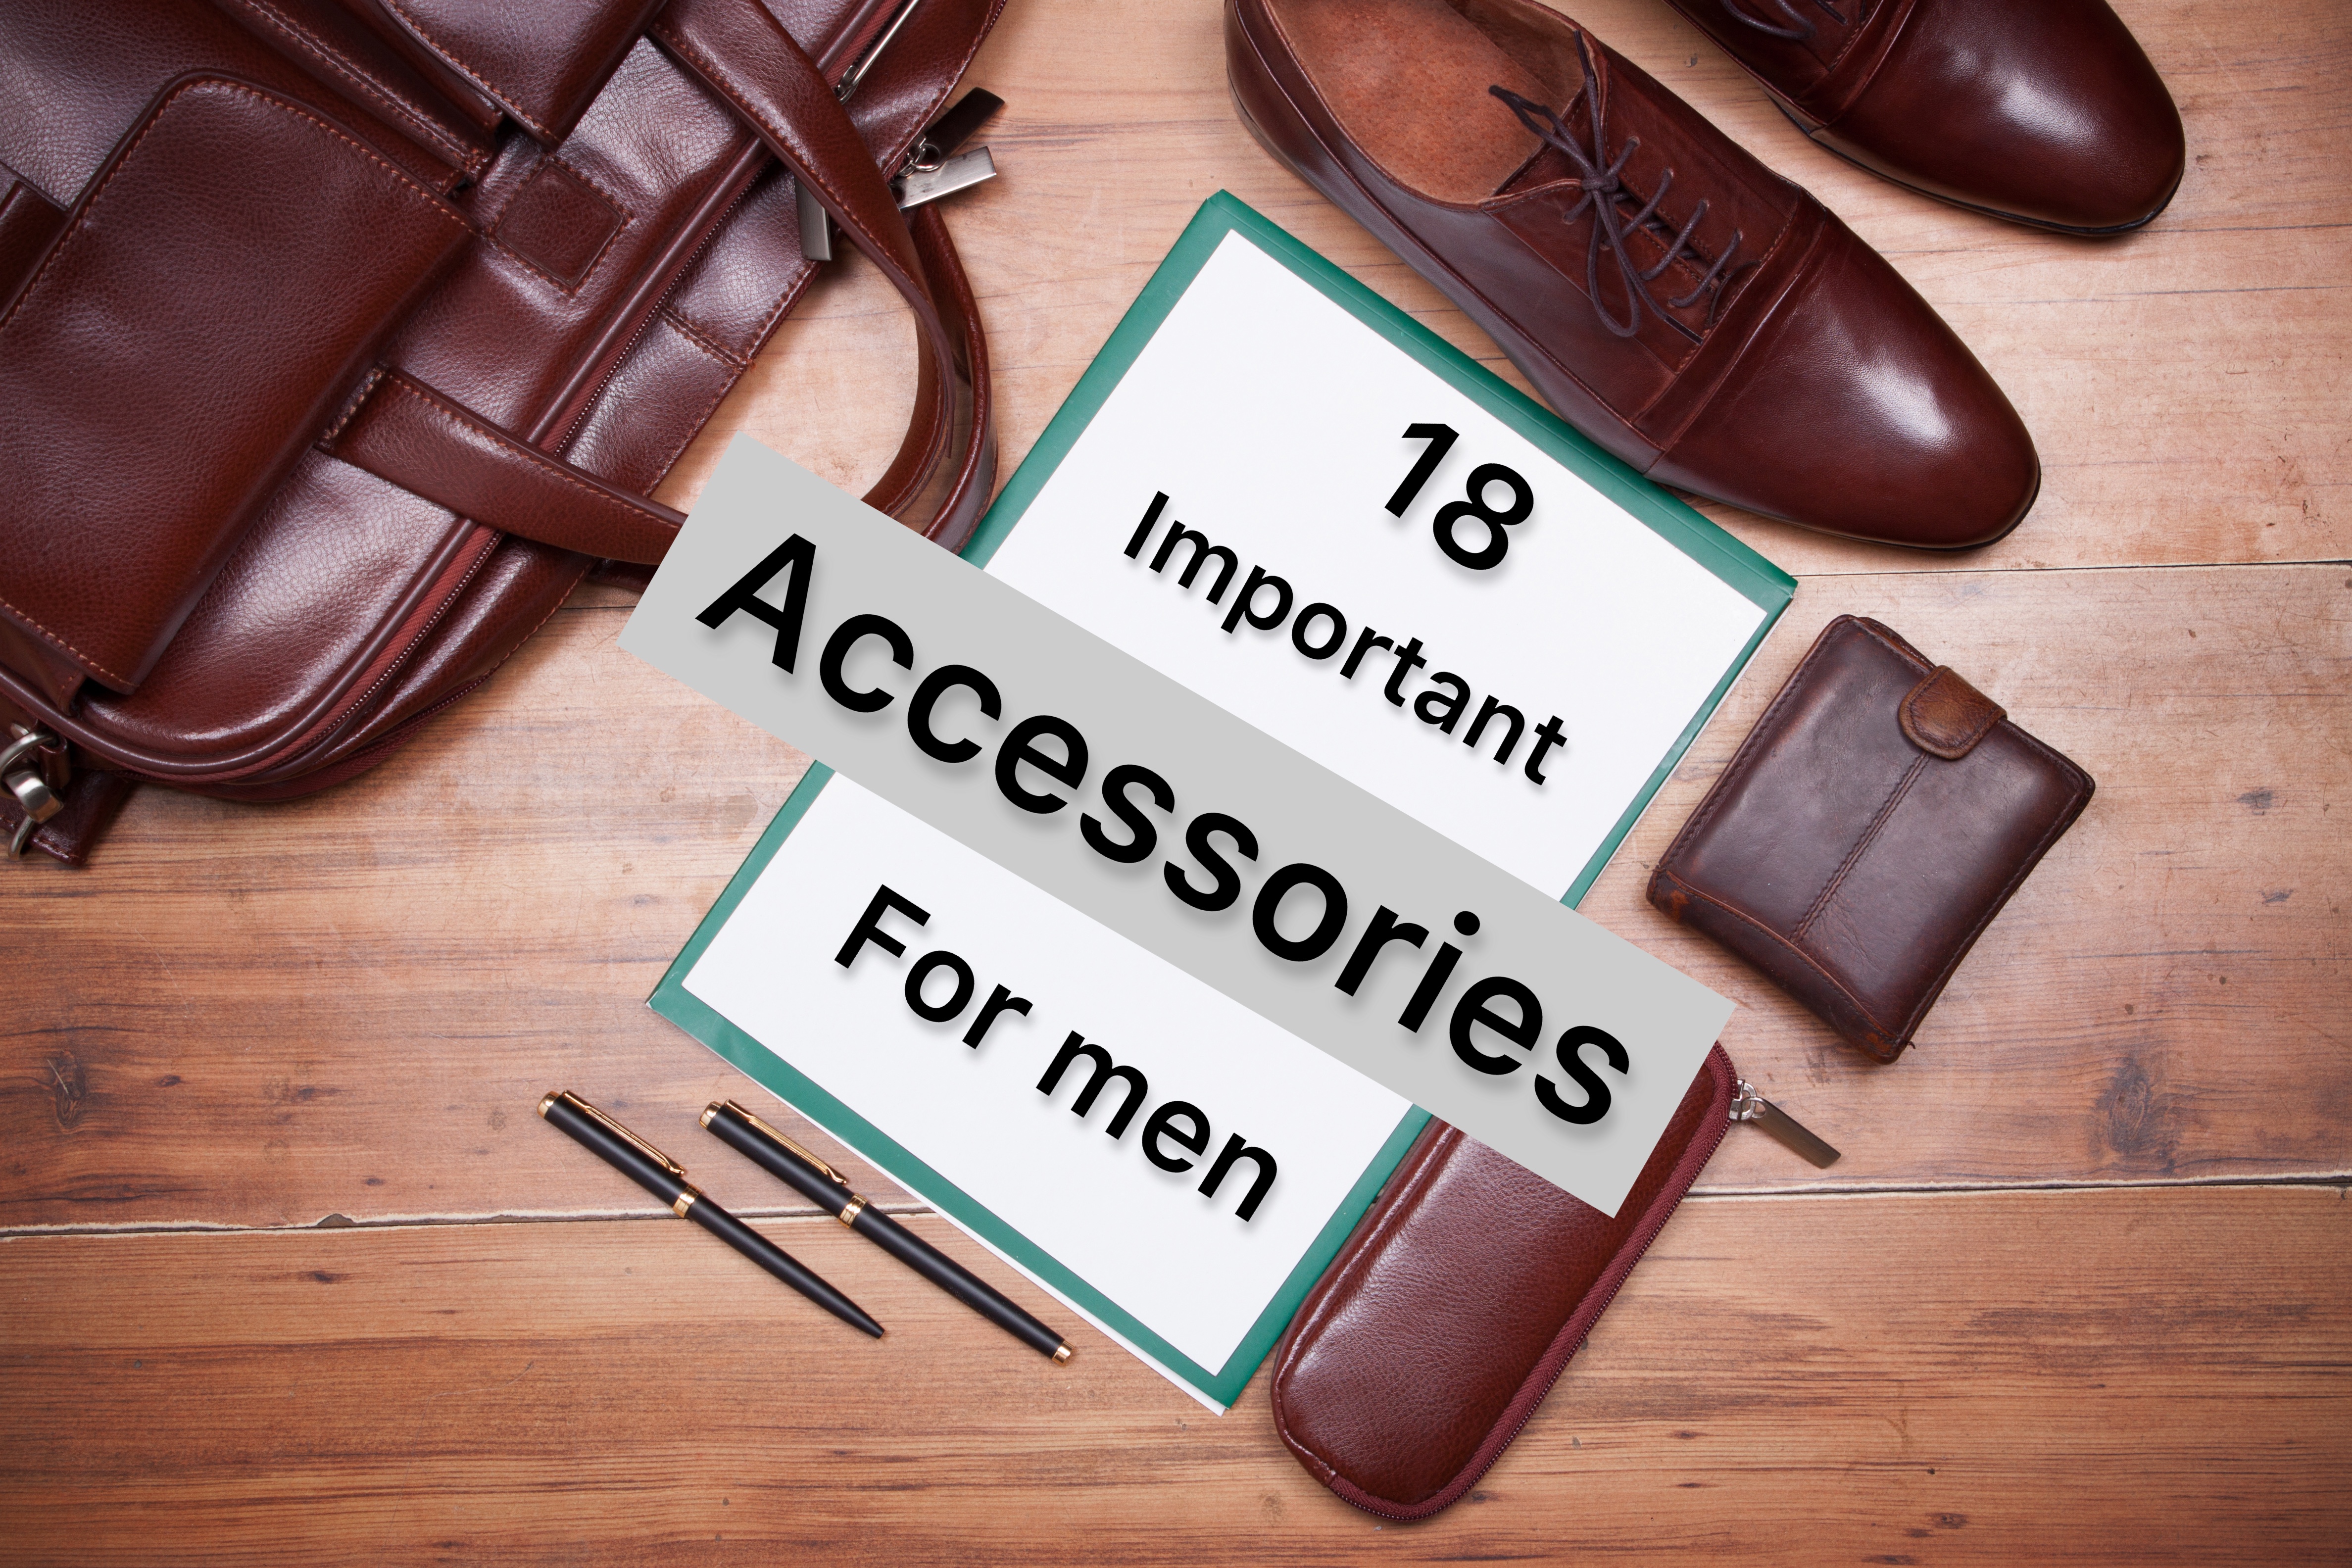 18 accessories men can add to their outfit to upgrade it.